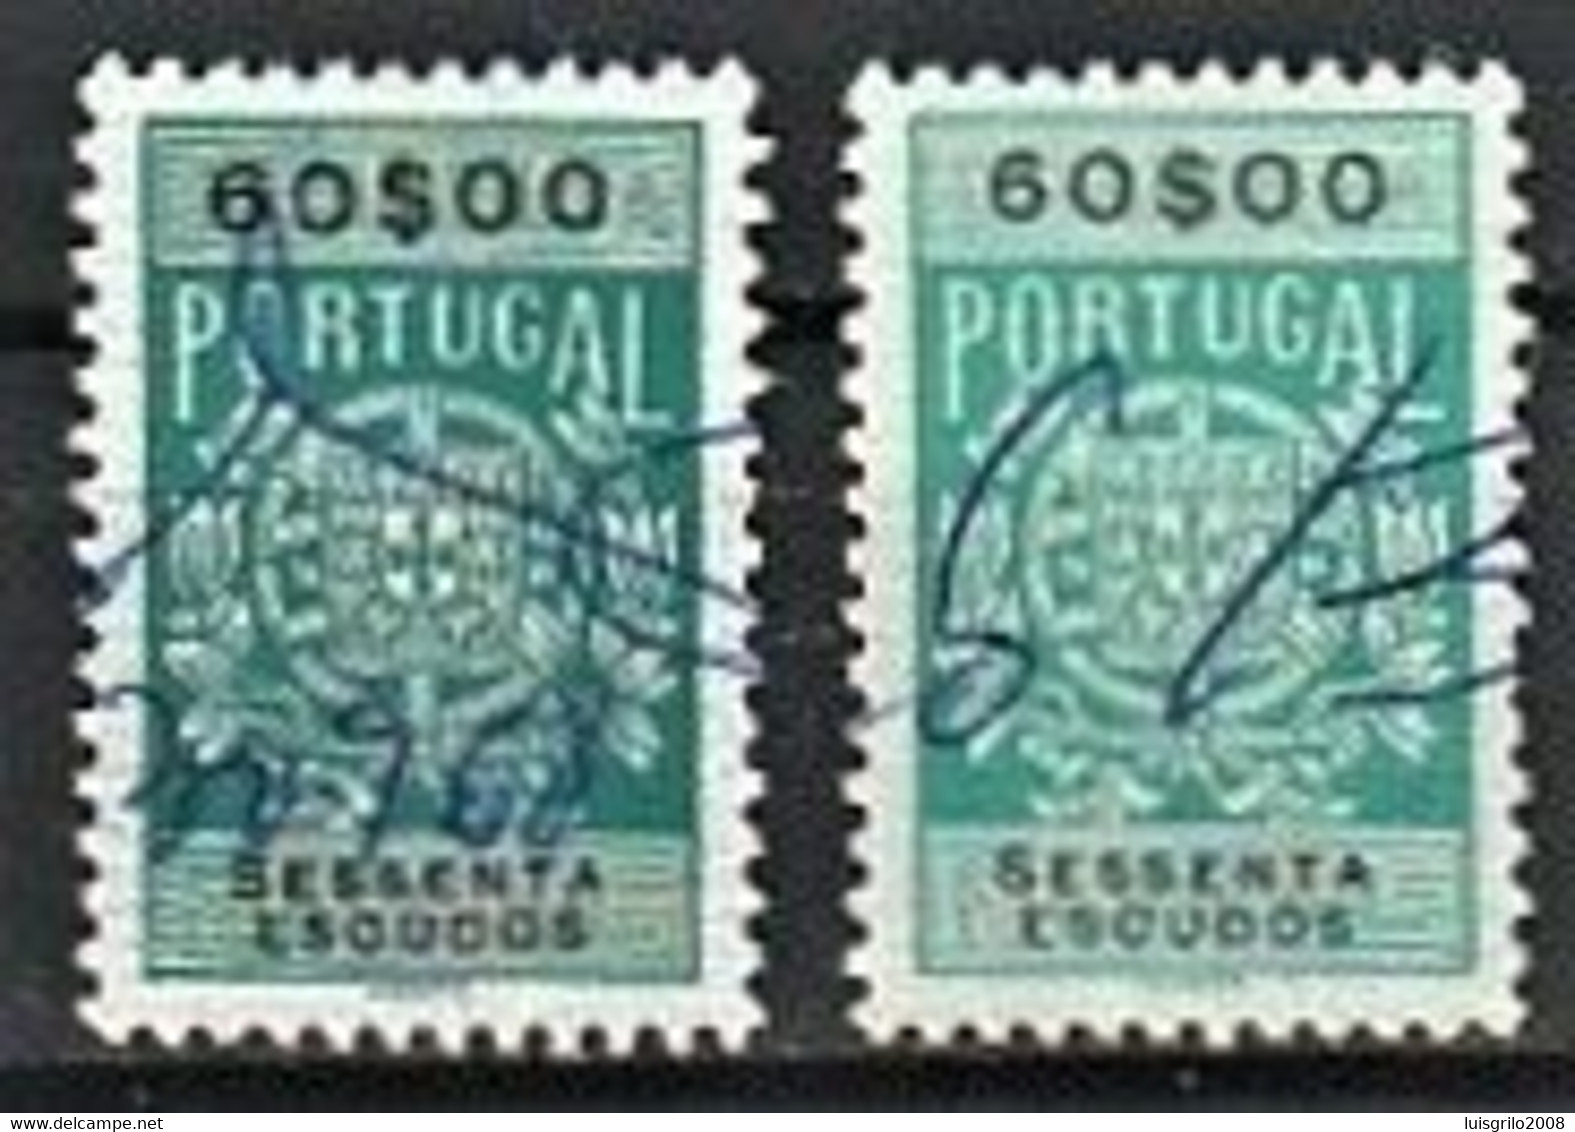 Fiscal/ Revenue, Portugal 1940 - Estampilha Fiscal -|- 60$00 - COLOR VARIANT - Is The Stamp Of The Right - Gebruikt